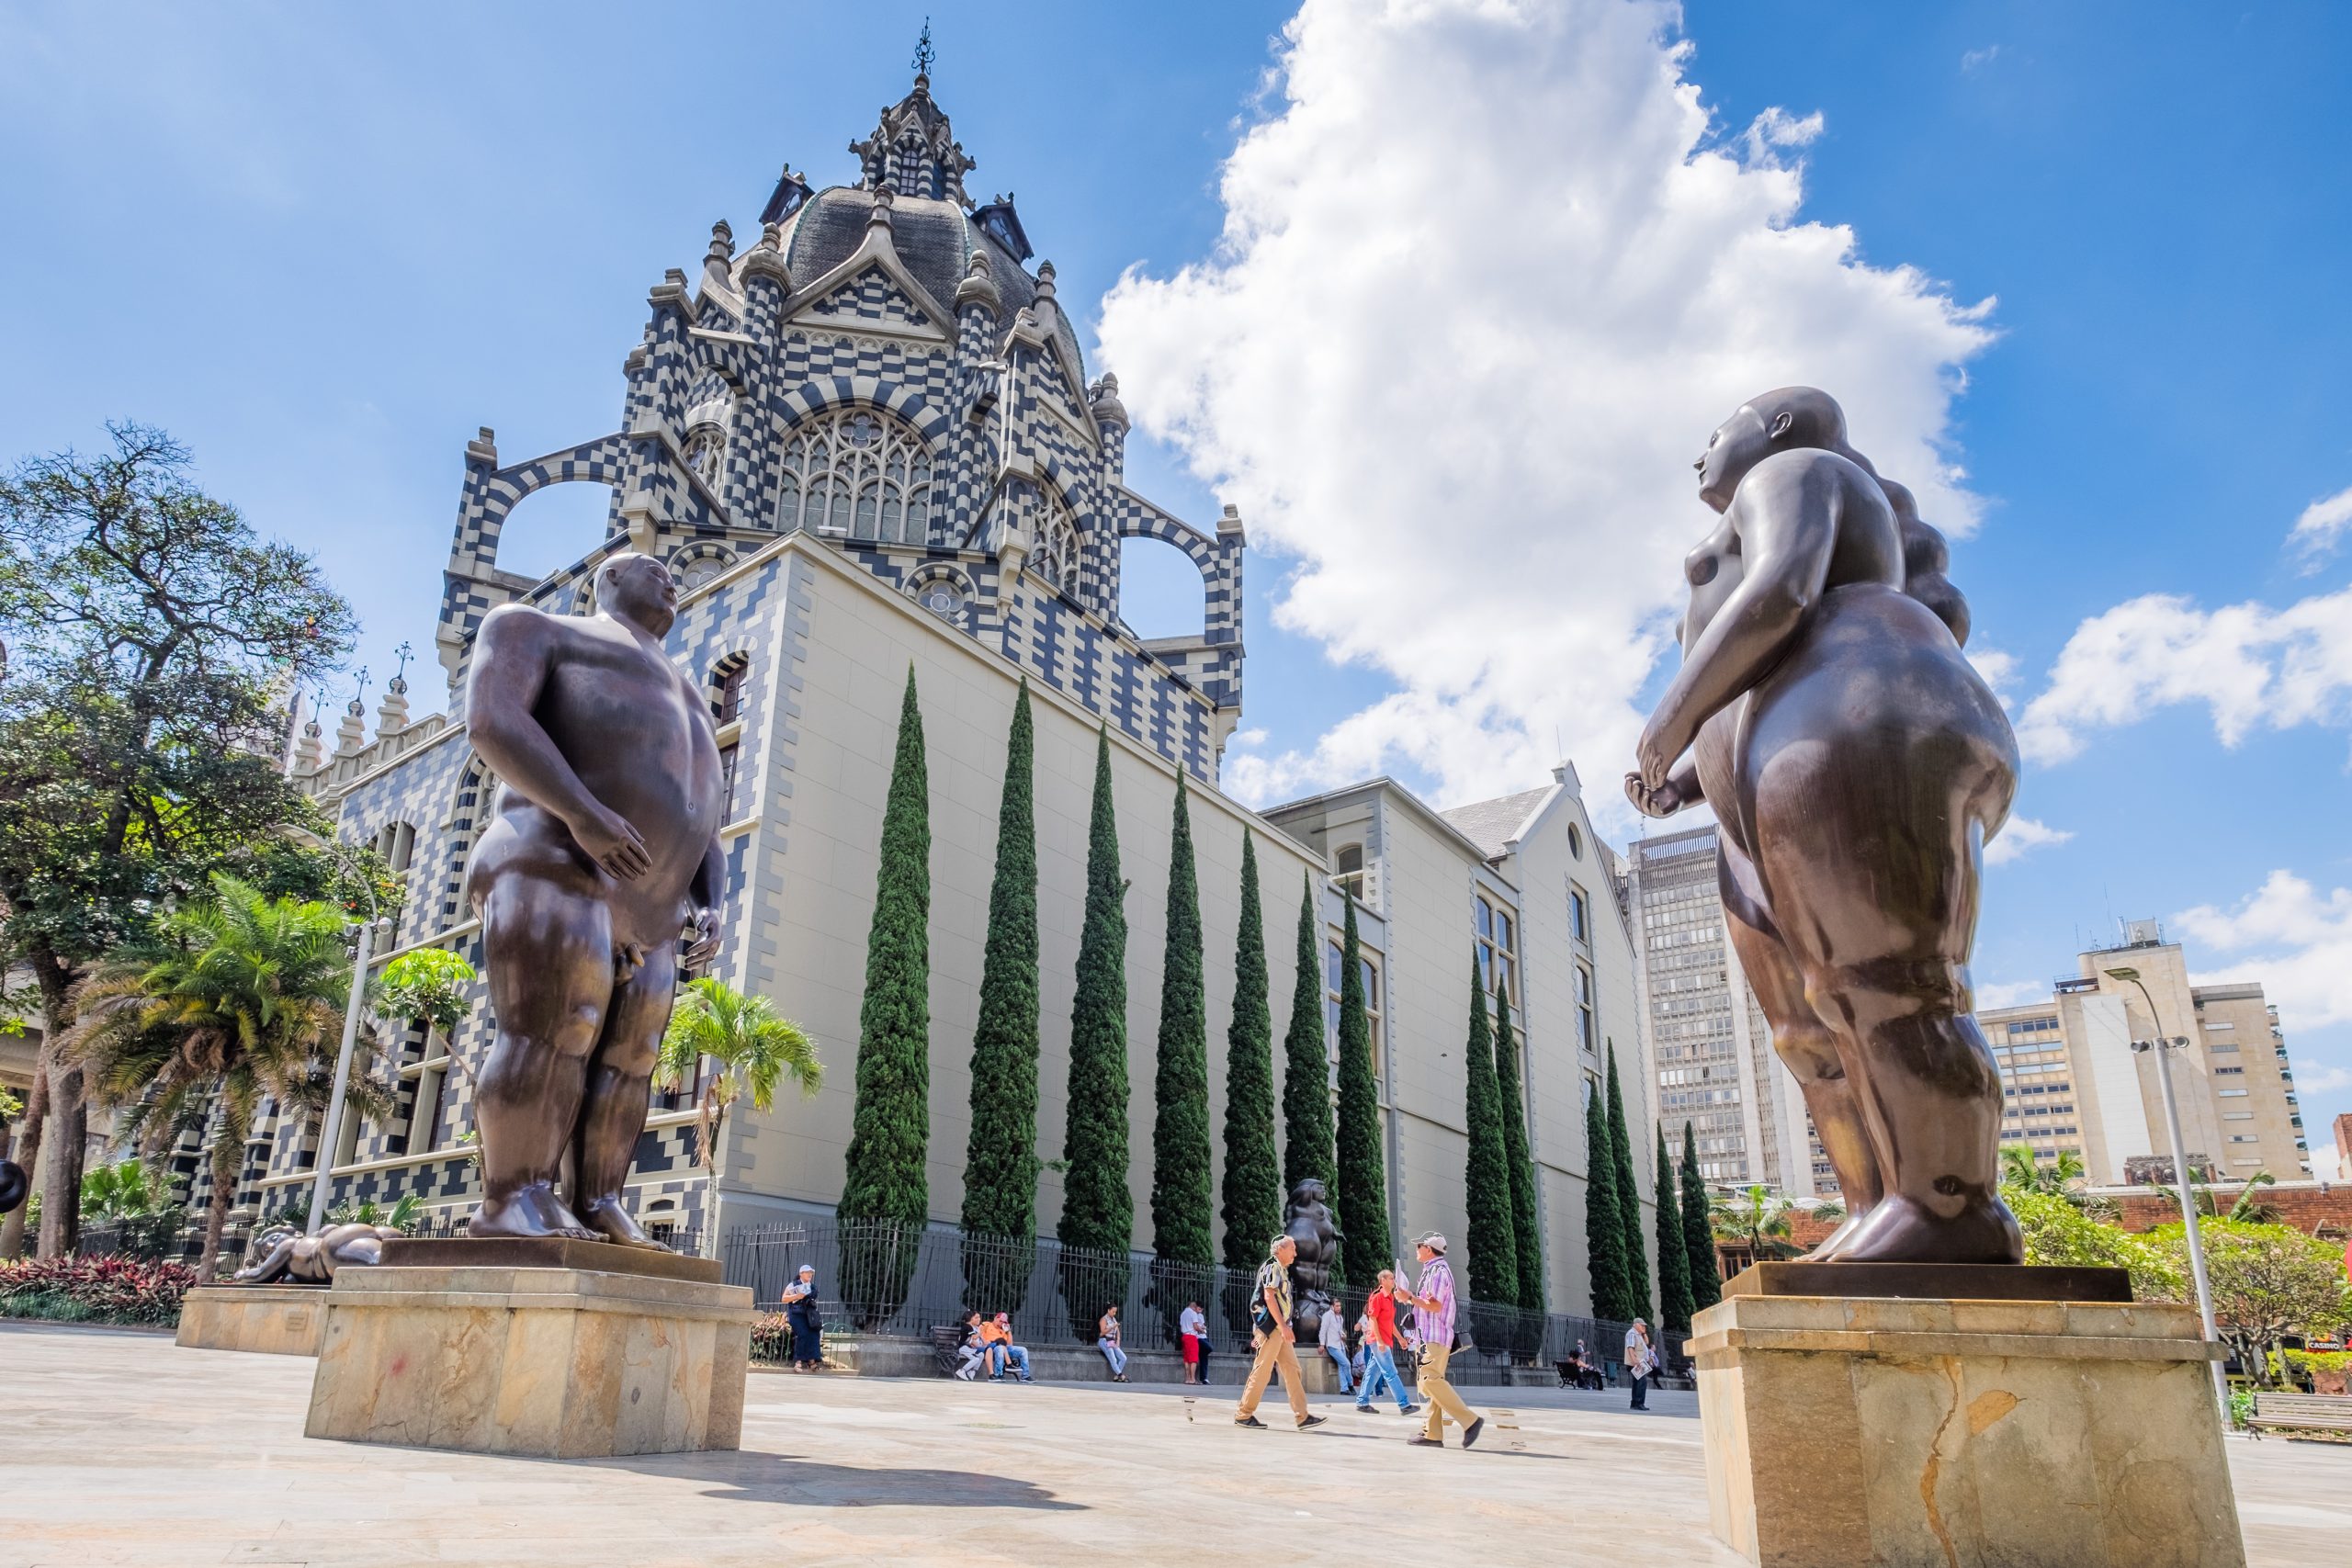 Plaza Botero and the Botero sculpture